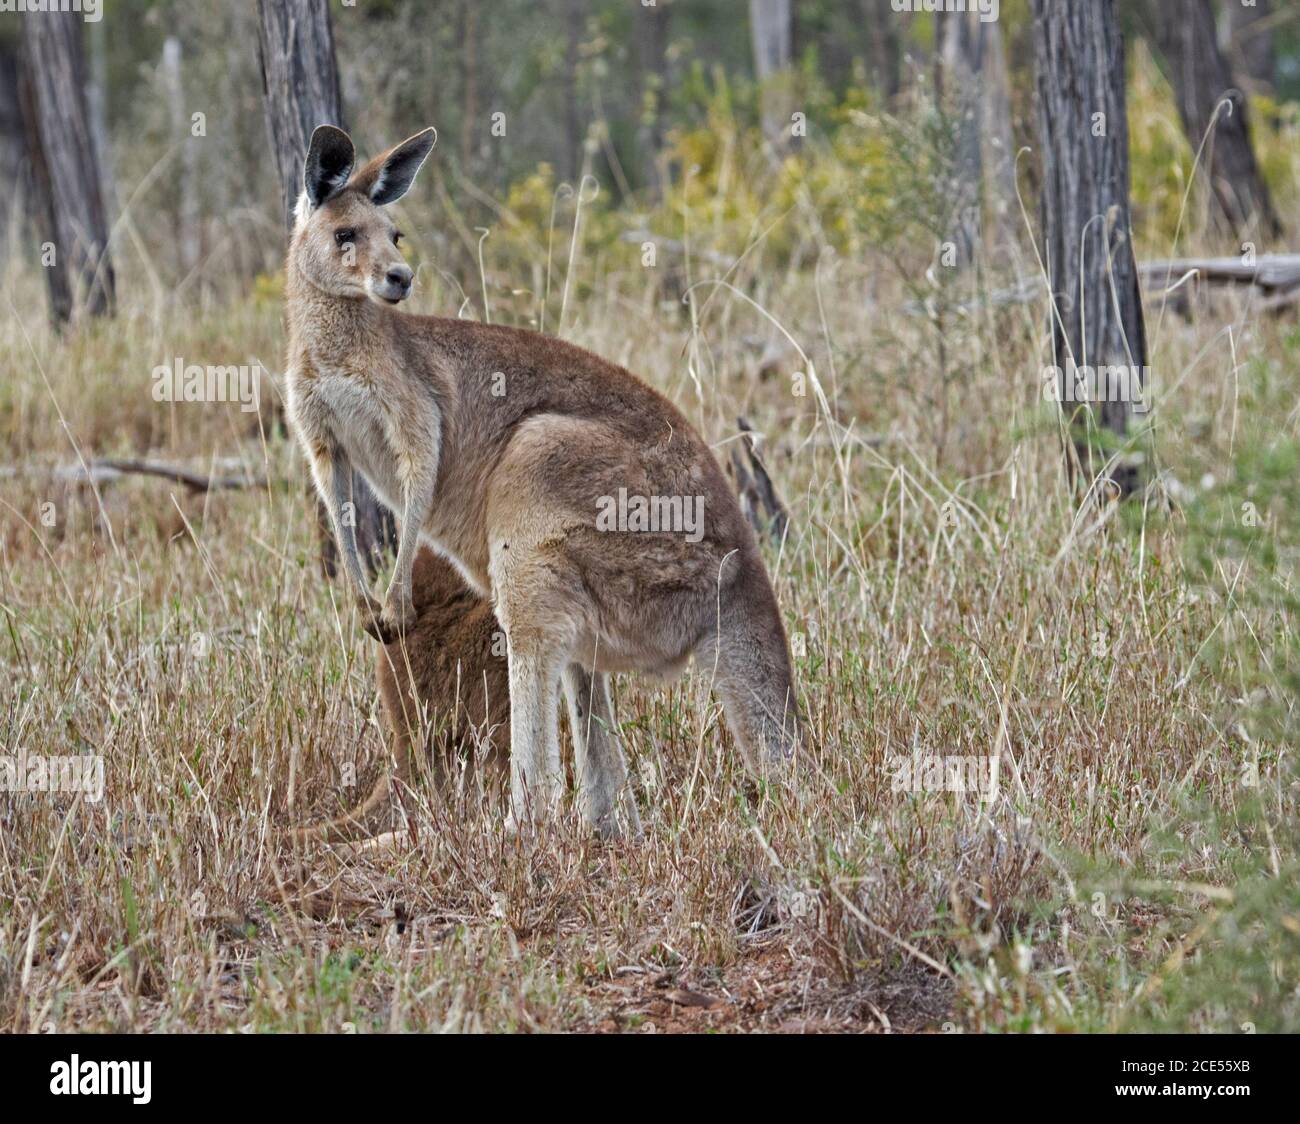 Beautiful female Australian Eastern Grey kangaroo  in the wild in native woodlands, with background of tall grasses & trees Stock Photo